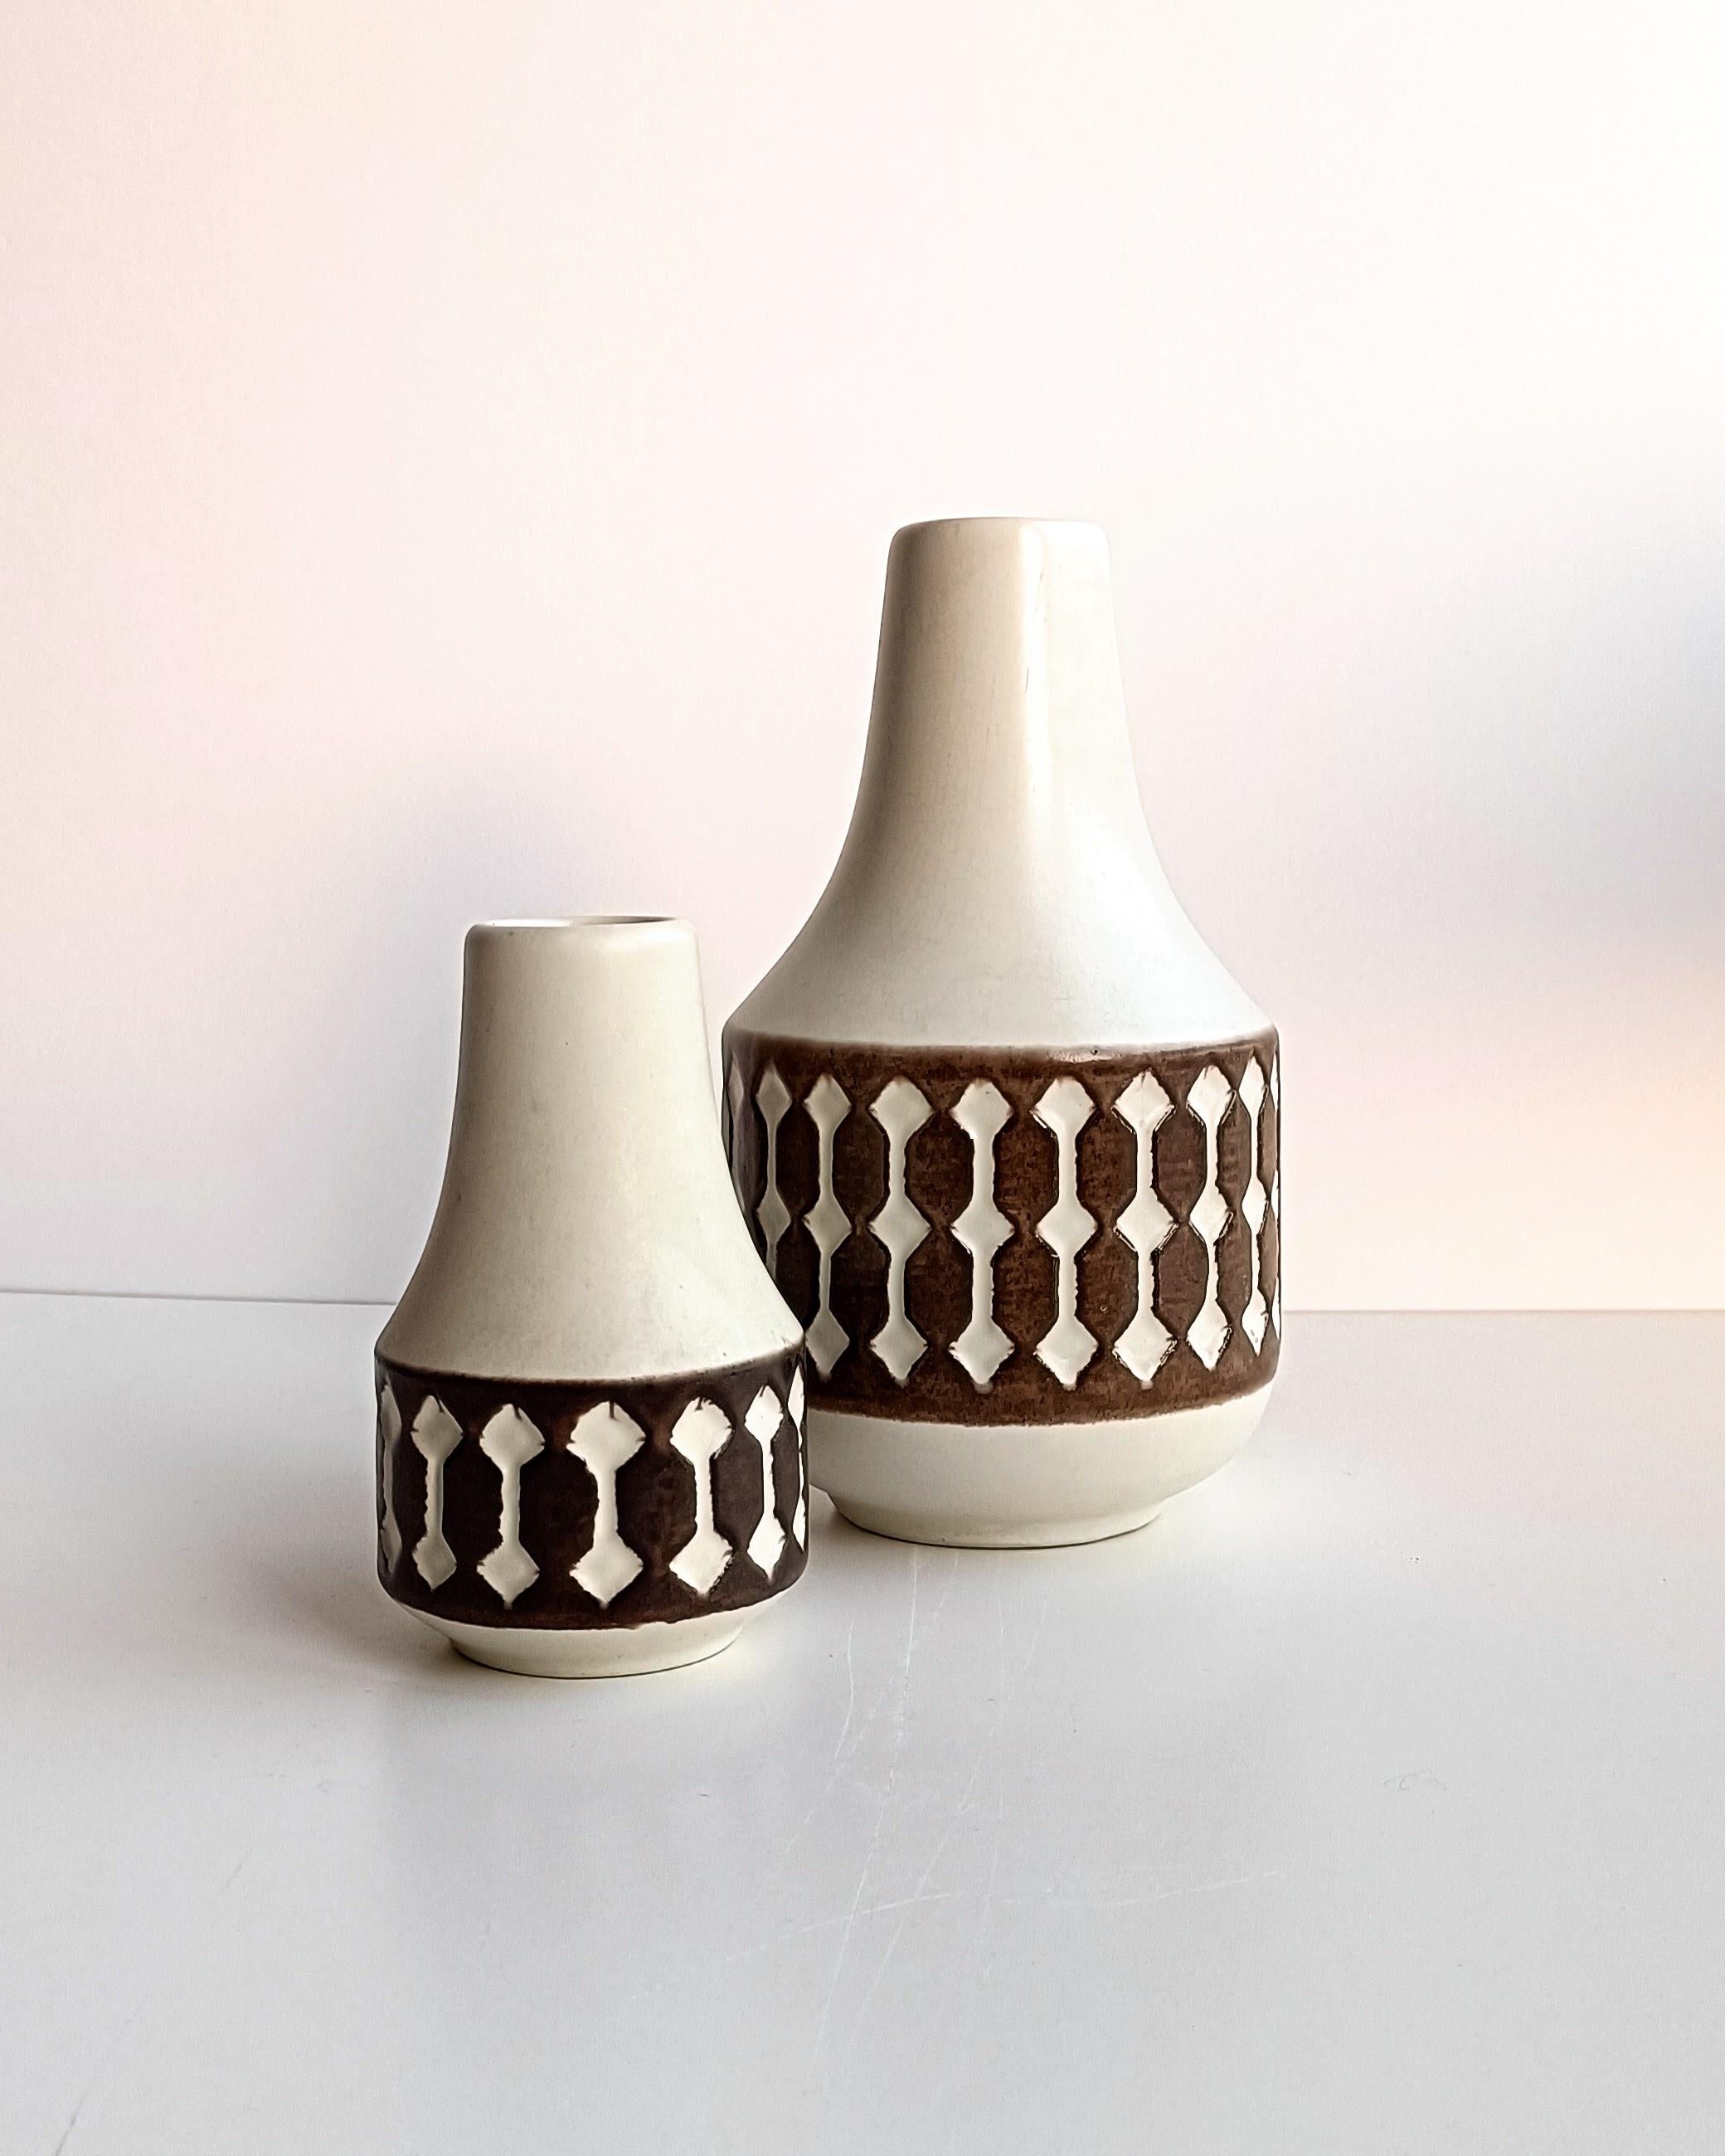 A beautiful pair of Jasba ceramic vases handcrafted in West Germany circa the 1960s. Their sleek lines, minimalist forms, and subtle colors capture the essence of mid-century modern design.

Jasba Ceramics, known for their quality craftsmanship and